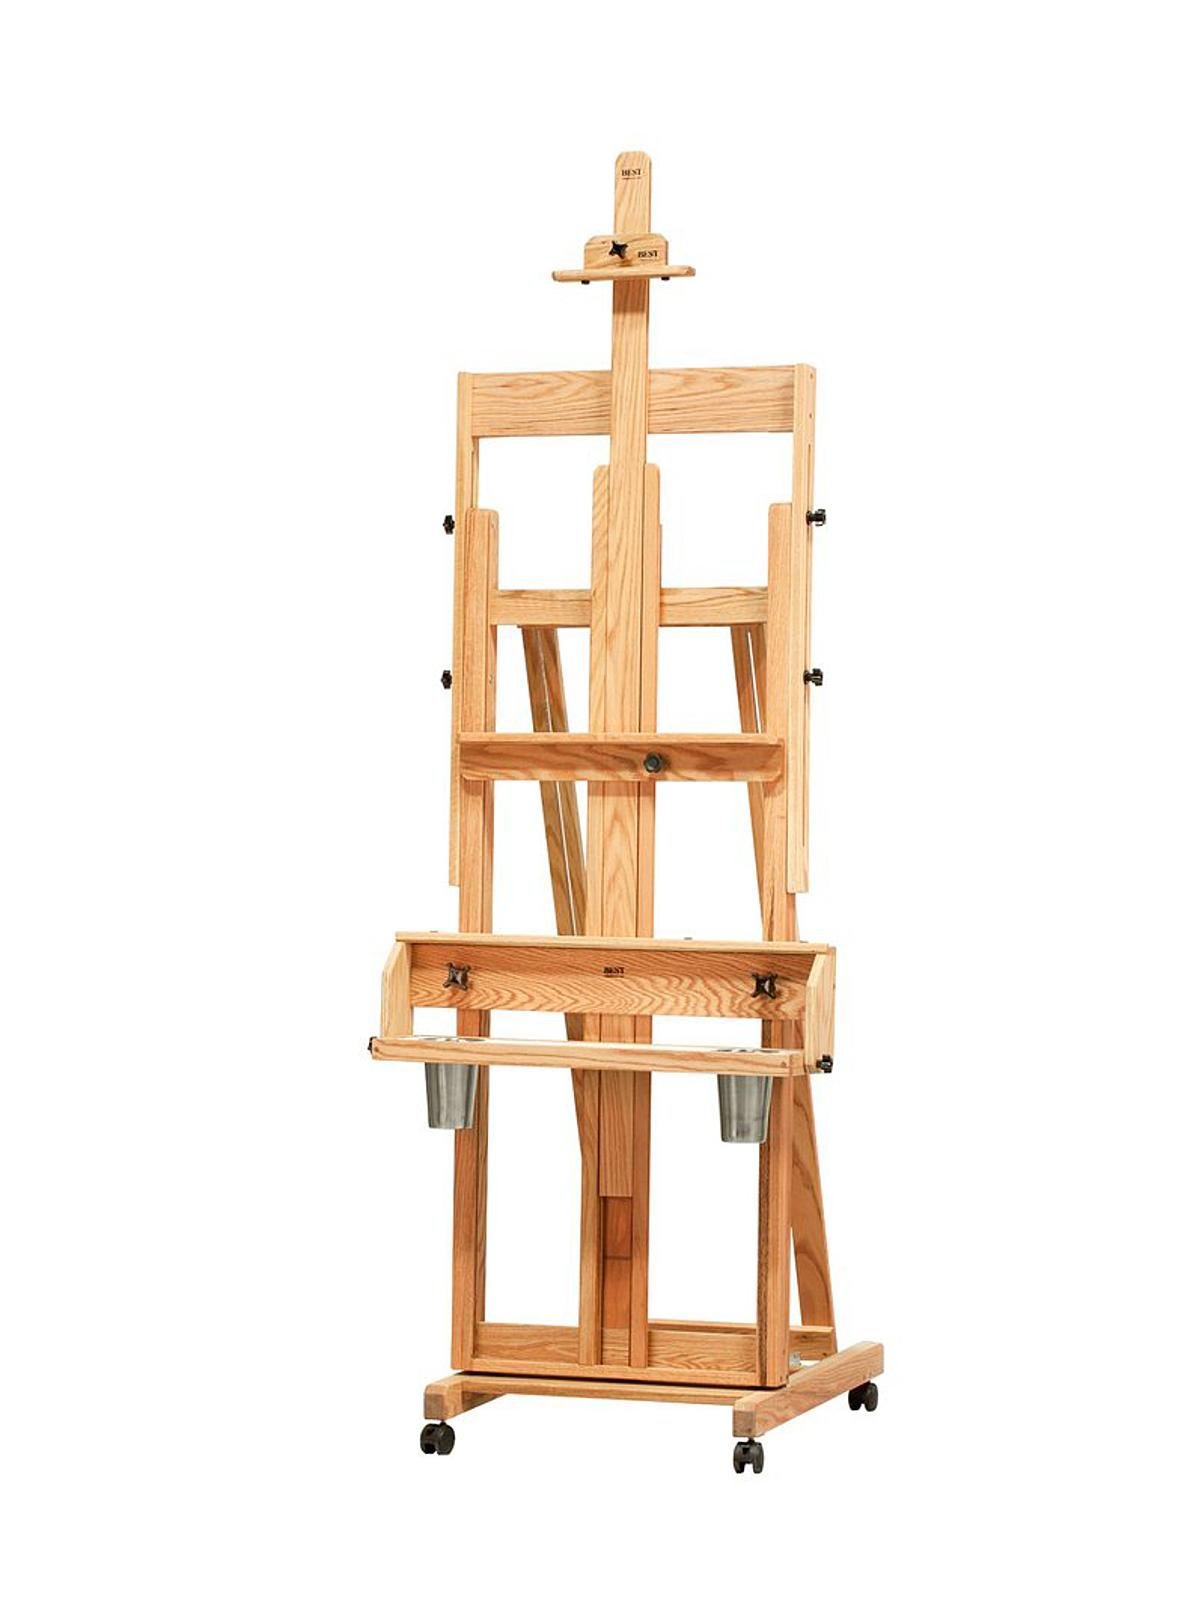 2 x WOODEN EASEL painting artist canvas holder